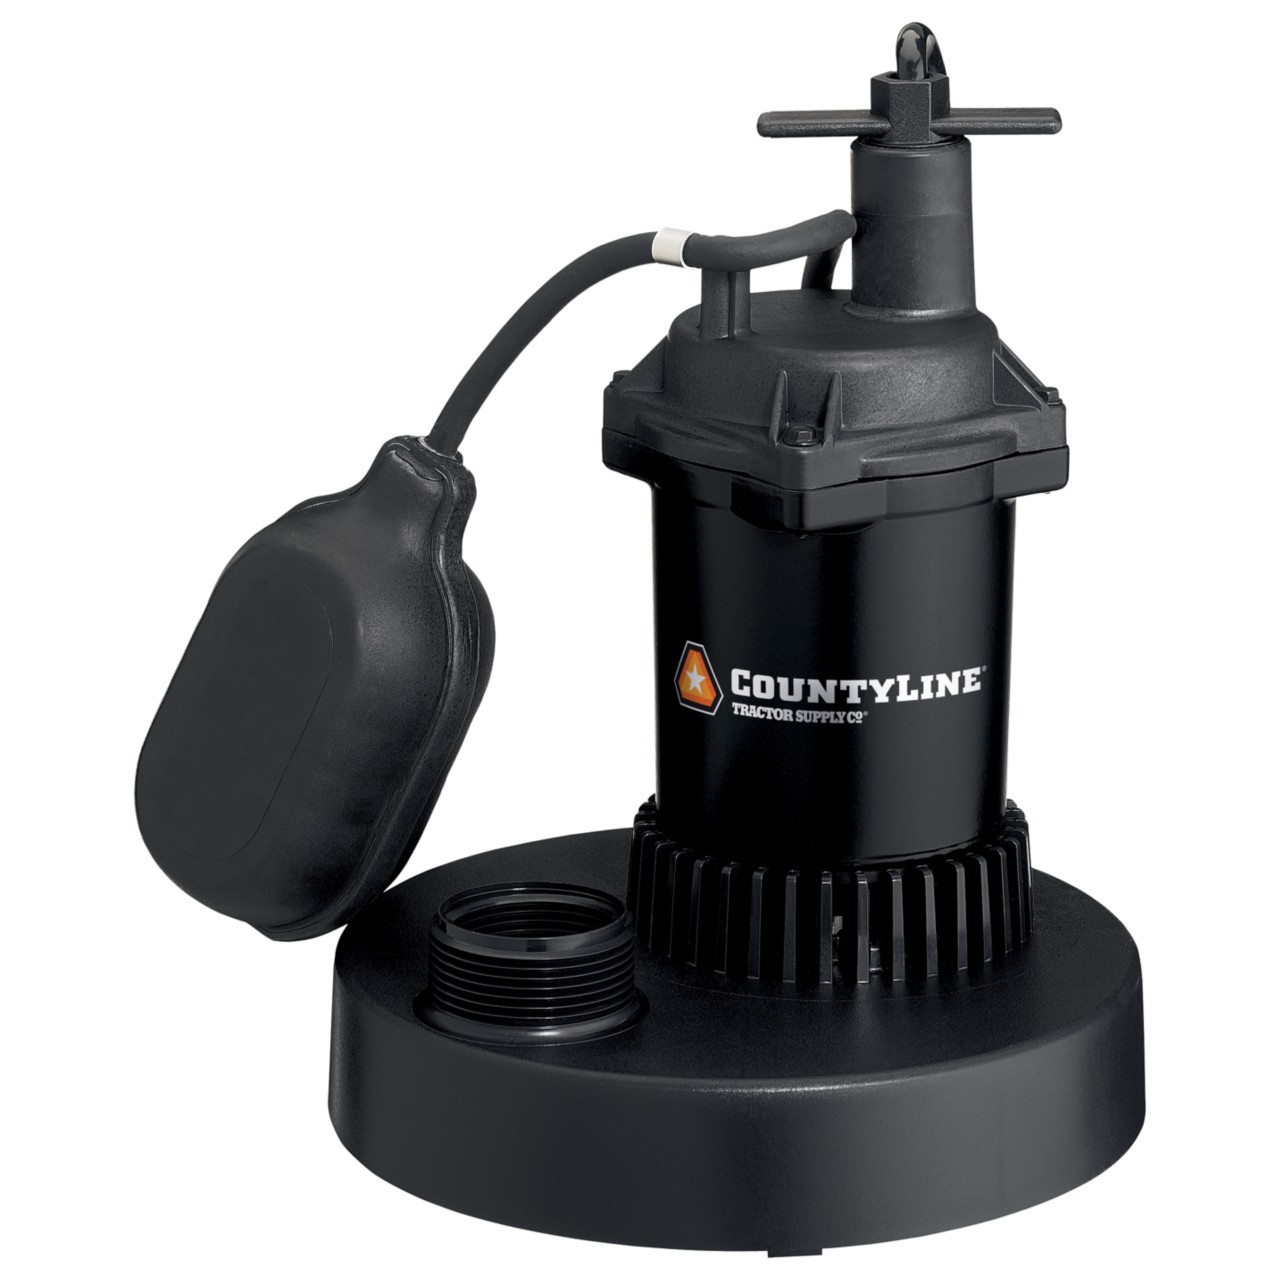 Image of a sump pump that links to all sump pump catalog.